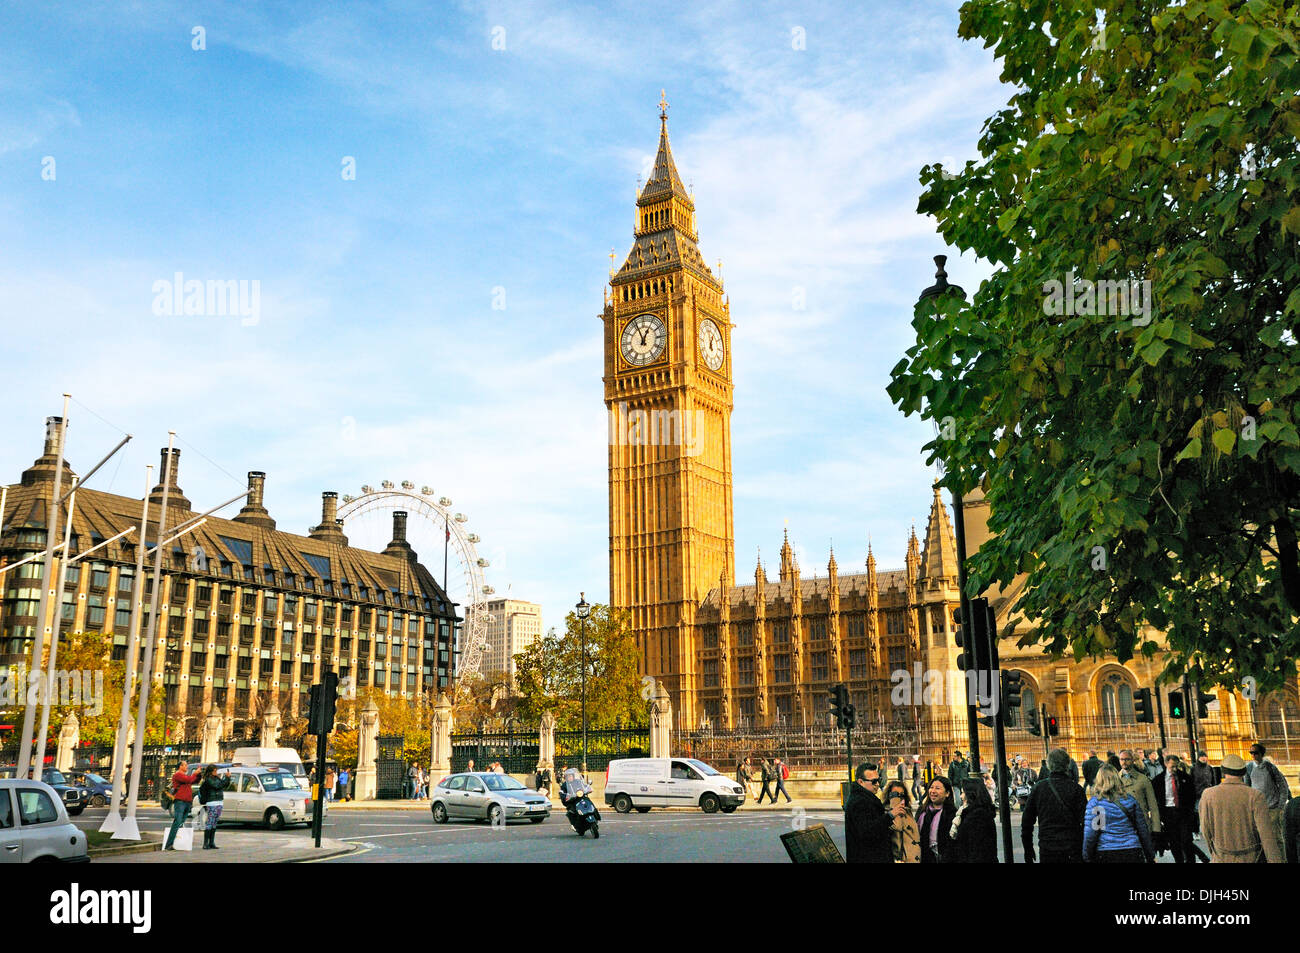 Big Ben and Houses of Parliament, Parliament Square, Westminster, London, England, UK Stock Photo